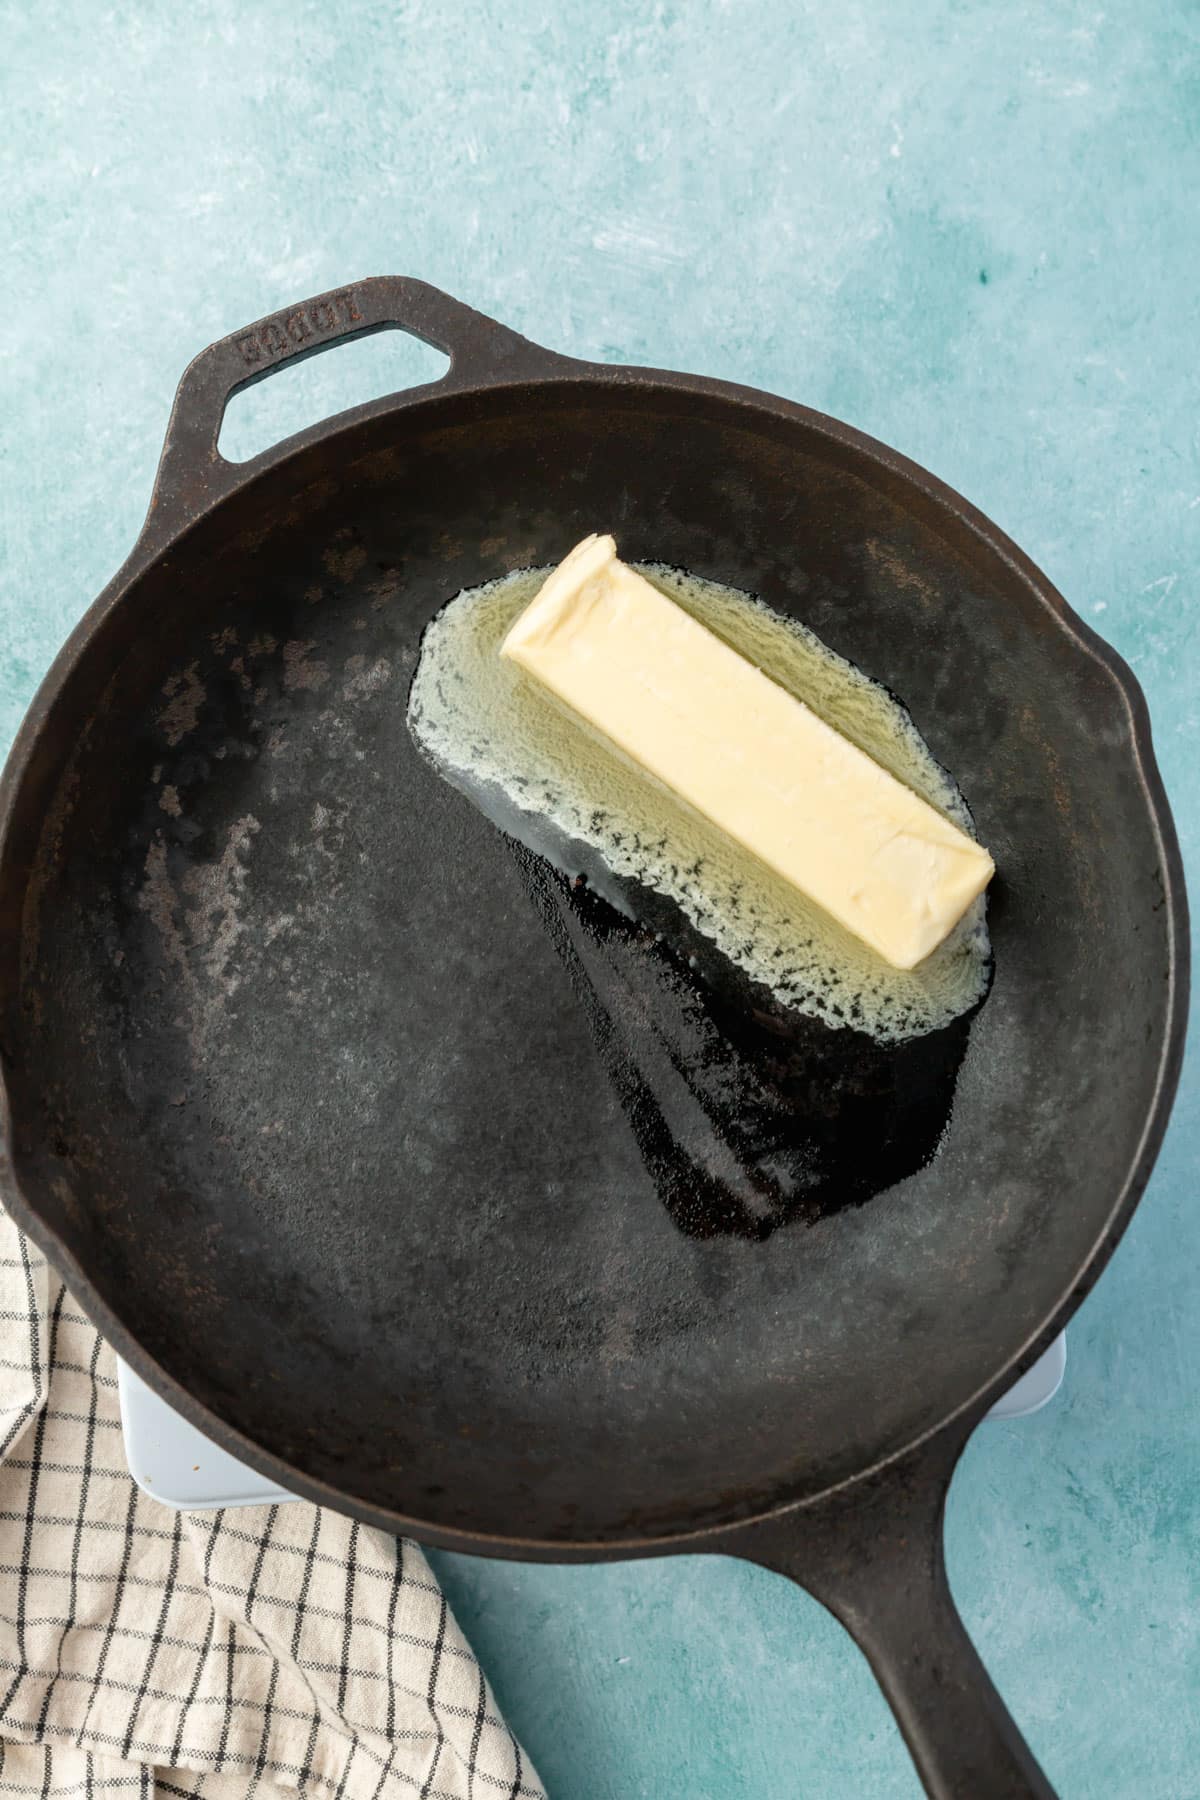 A cast iron skillet with a stick of butter in it that is starting to melt.